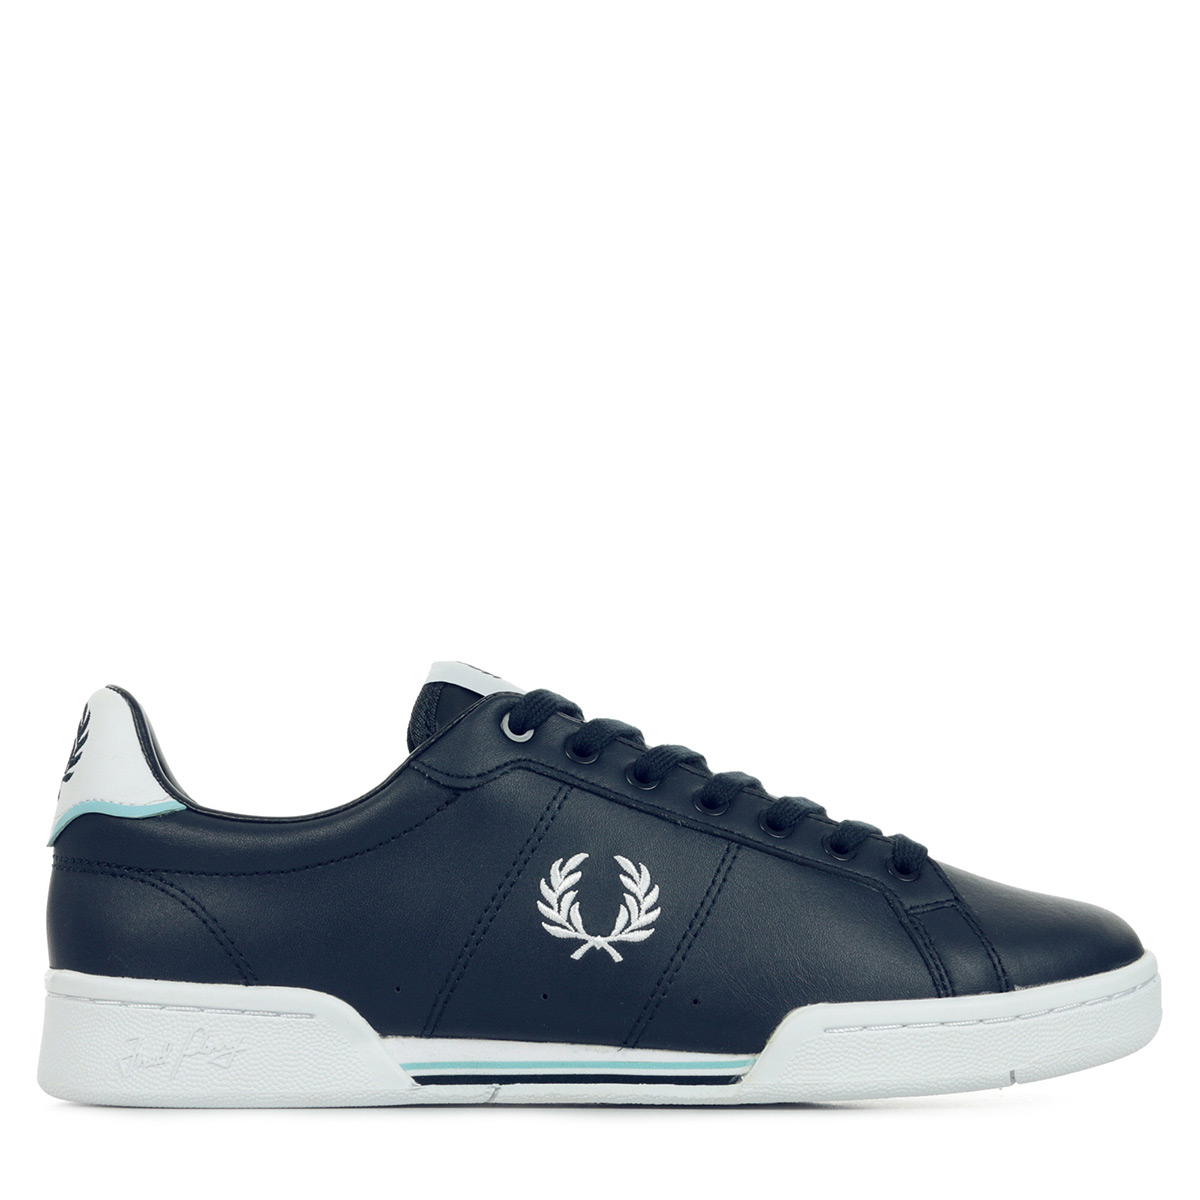 Fred Perry "B722 Leather"